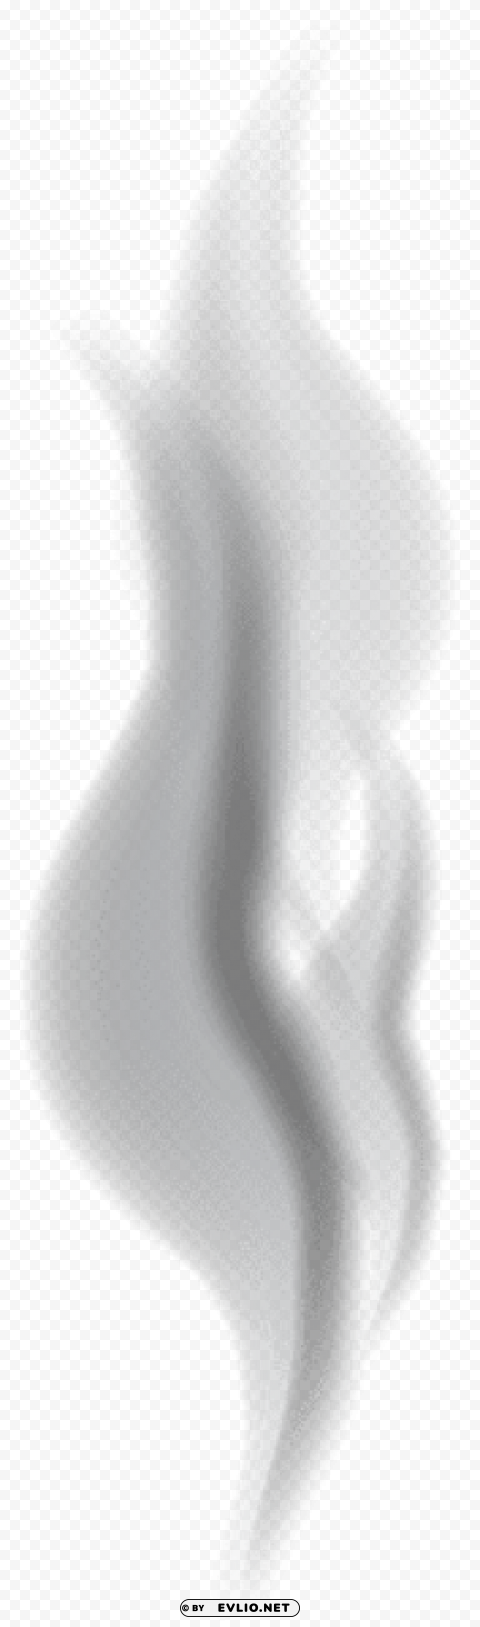 PNG image of smoke Isolated Subject on HighQuality Transparent PNG with a clear background - Image ID 05721fe8